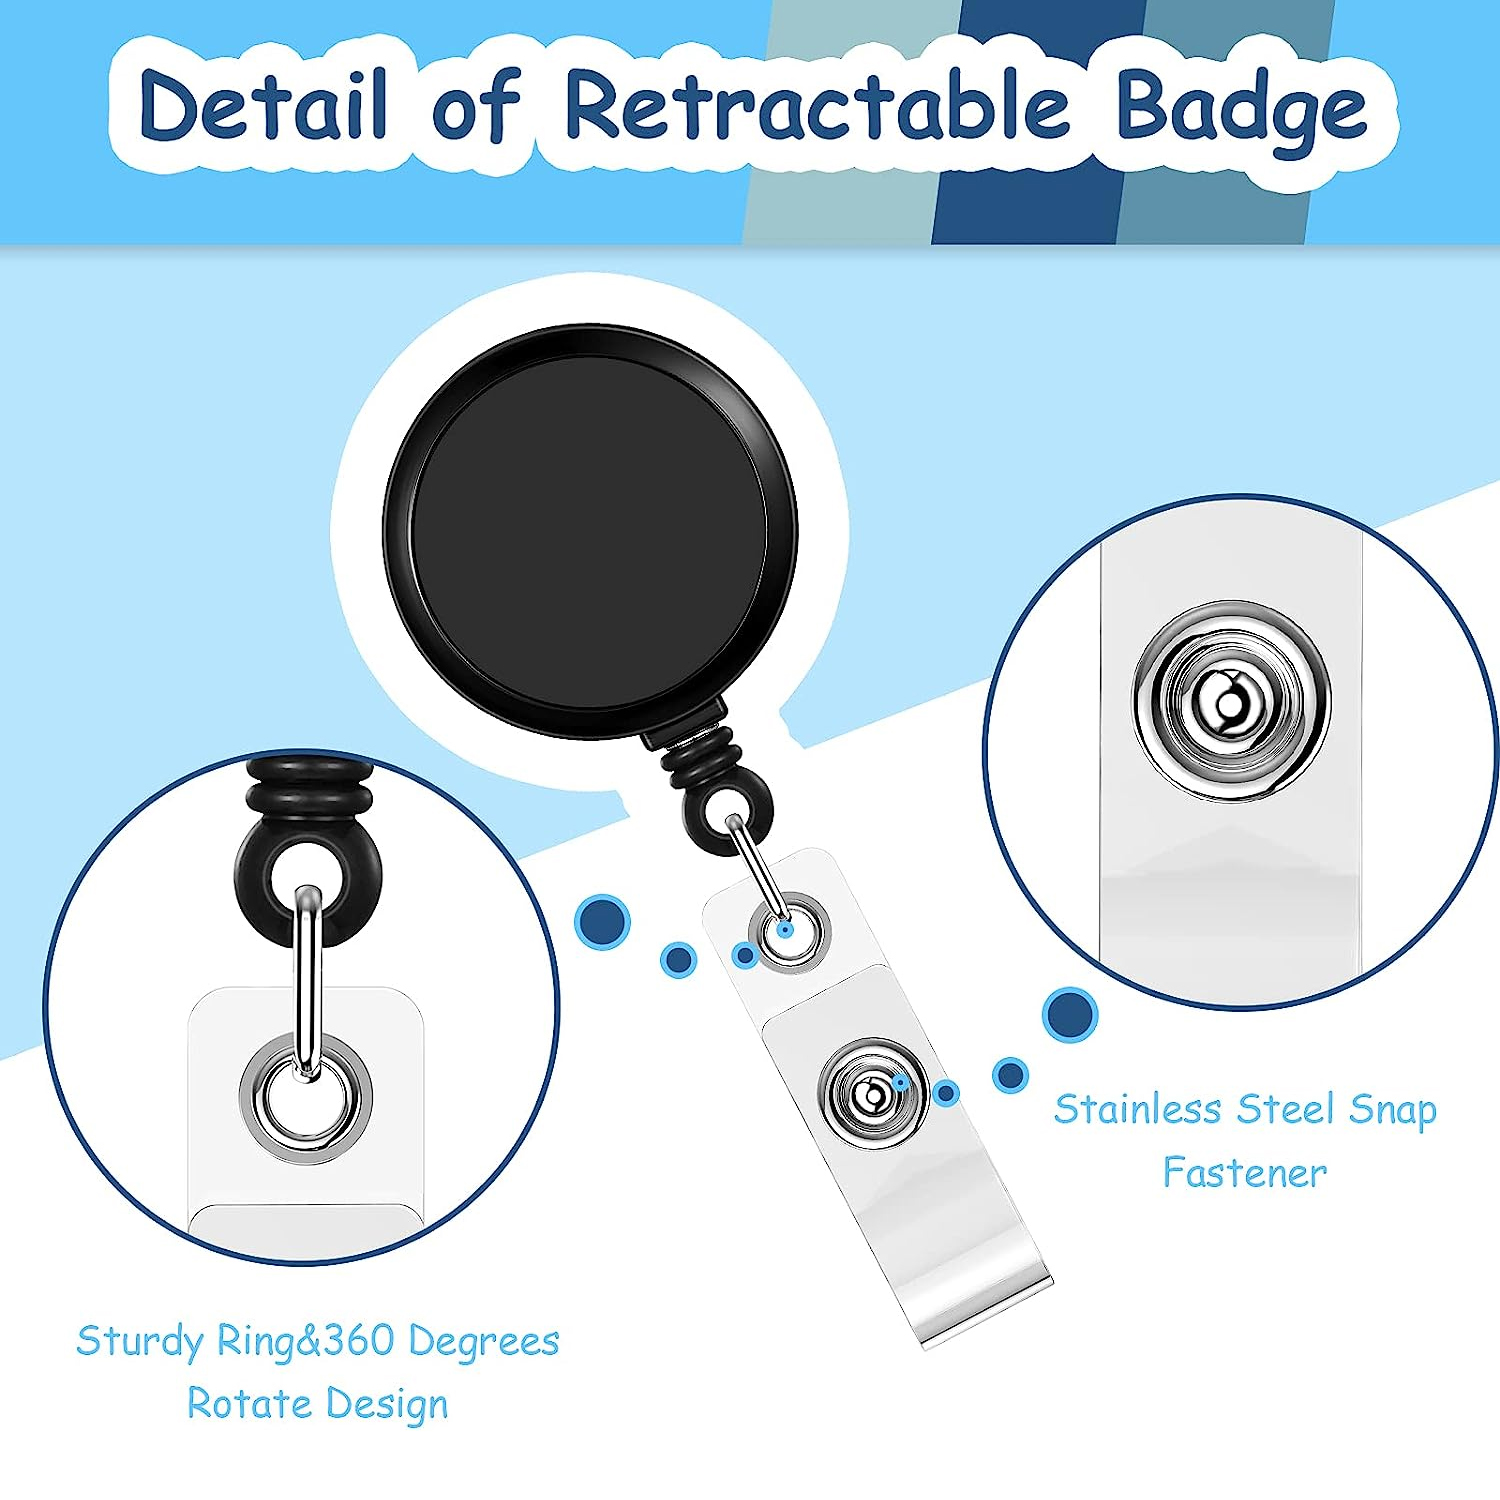 12pcs Sublimation Retractable Badge Holder With Belt Clip, Blank Nurse ID  Badge Reels For Office Worker Doctor Nurse, Key Card Name Tag Holder For Sub